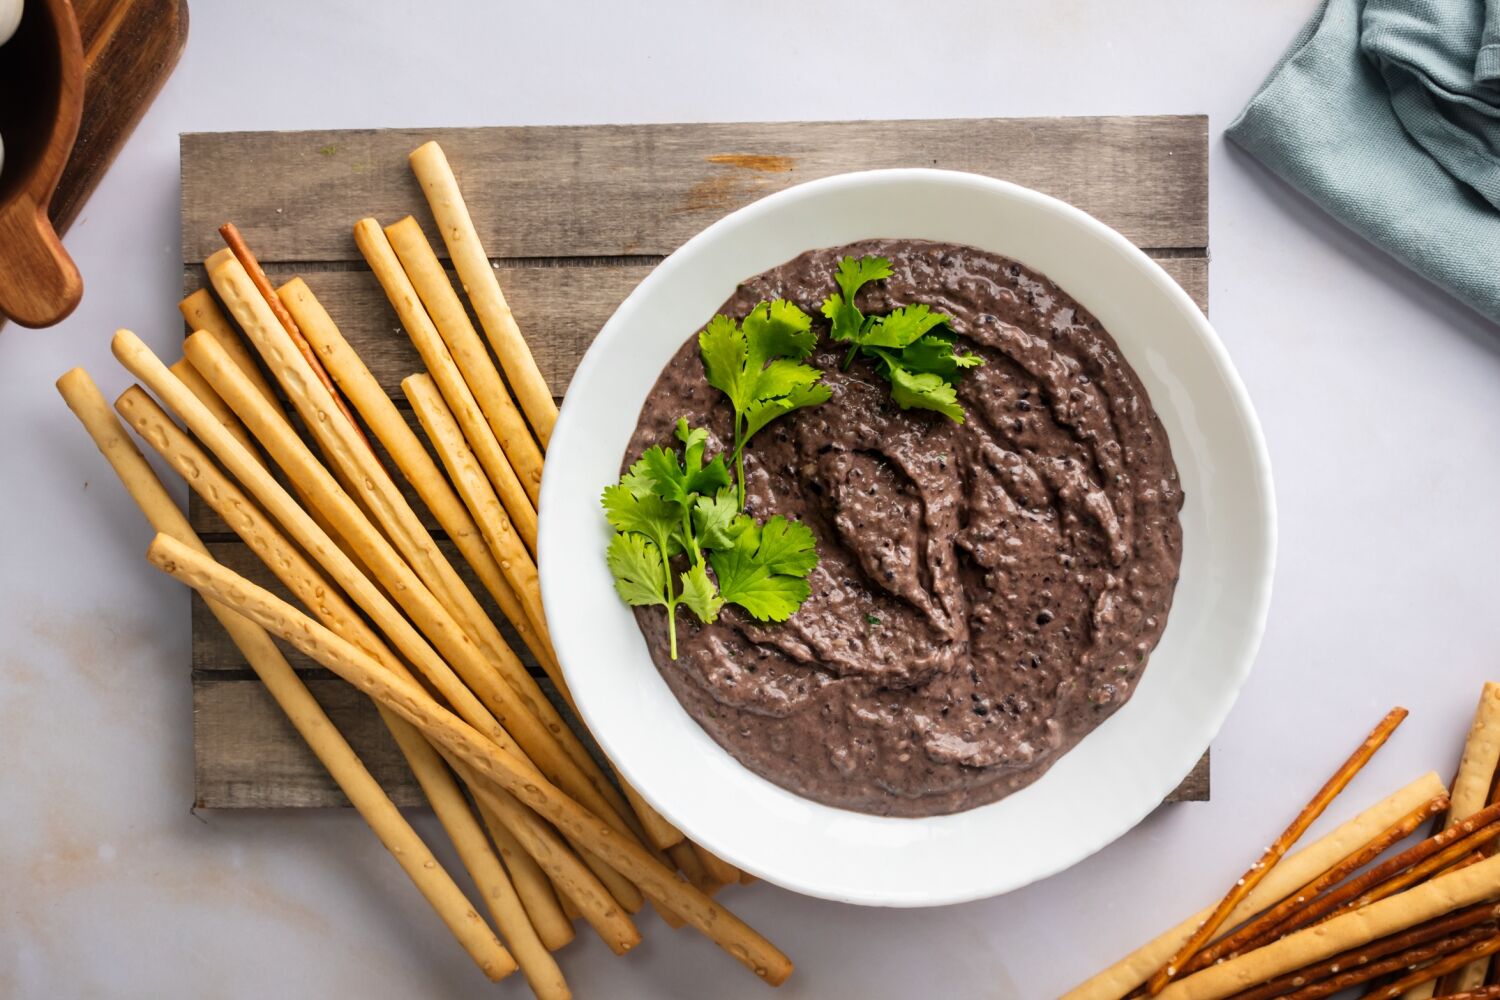 Black bean hummus in a bowl with cilantro with breadsticks and pretzels on the side.